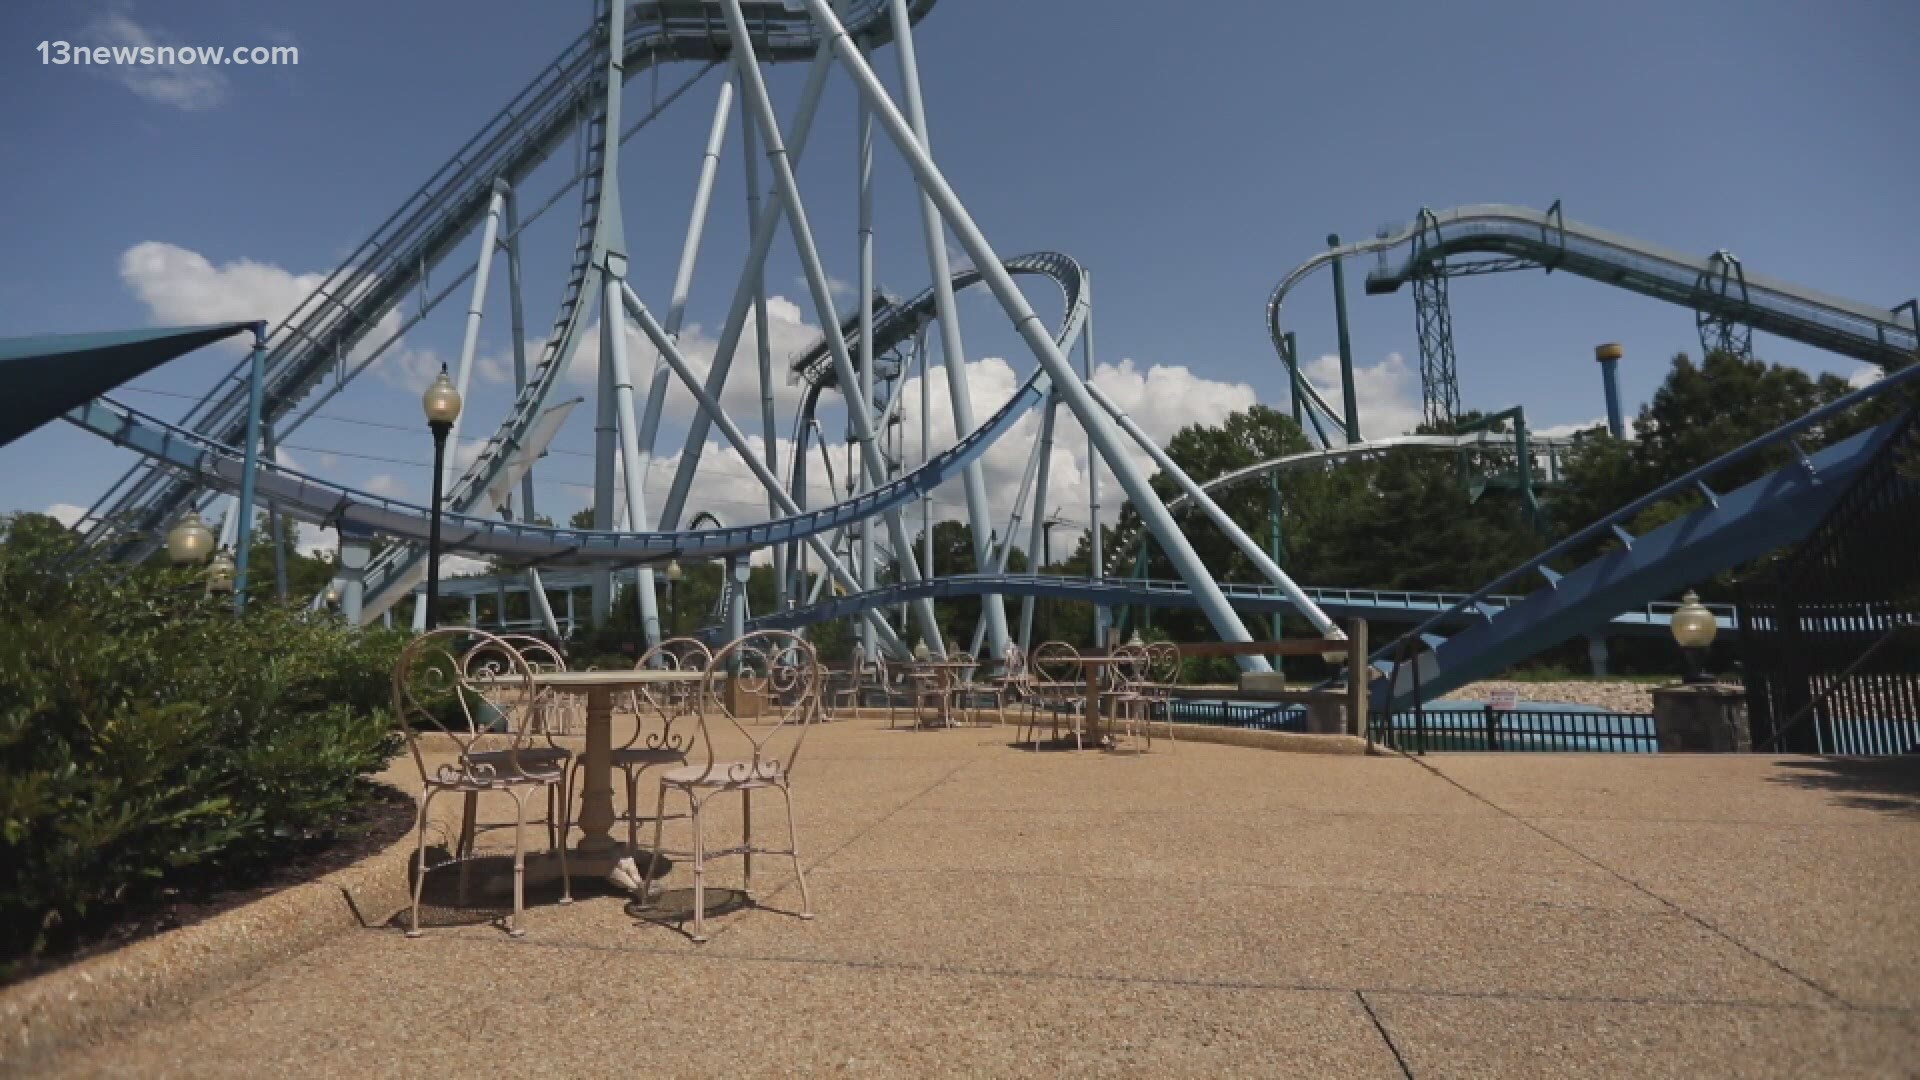 This is the first time the amusement park and zoo will open during the winter months.